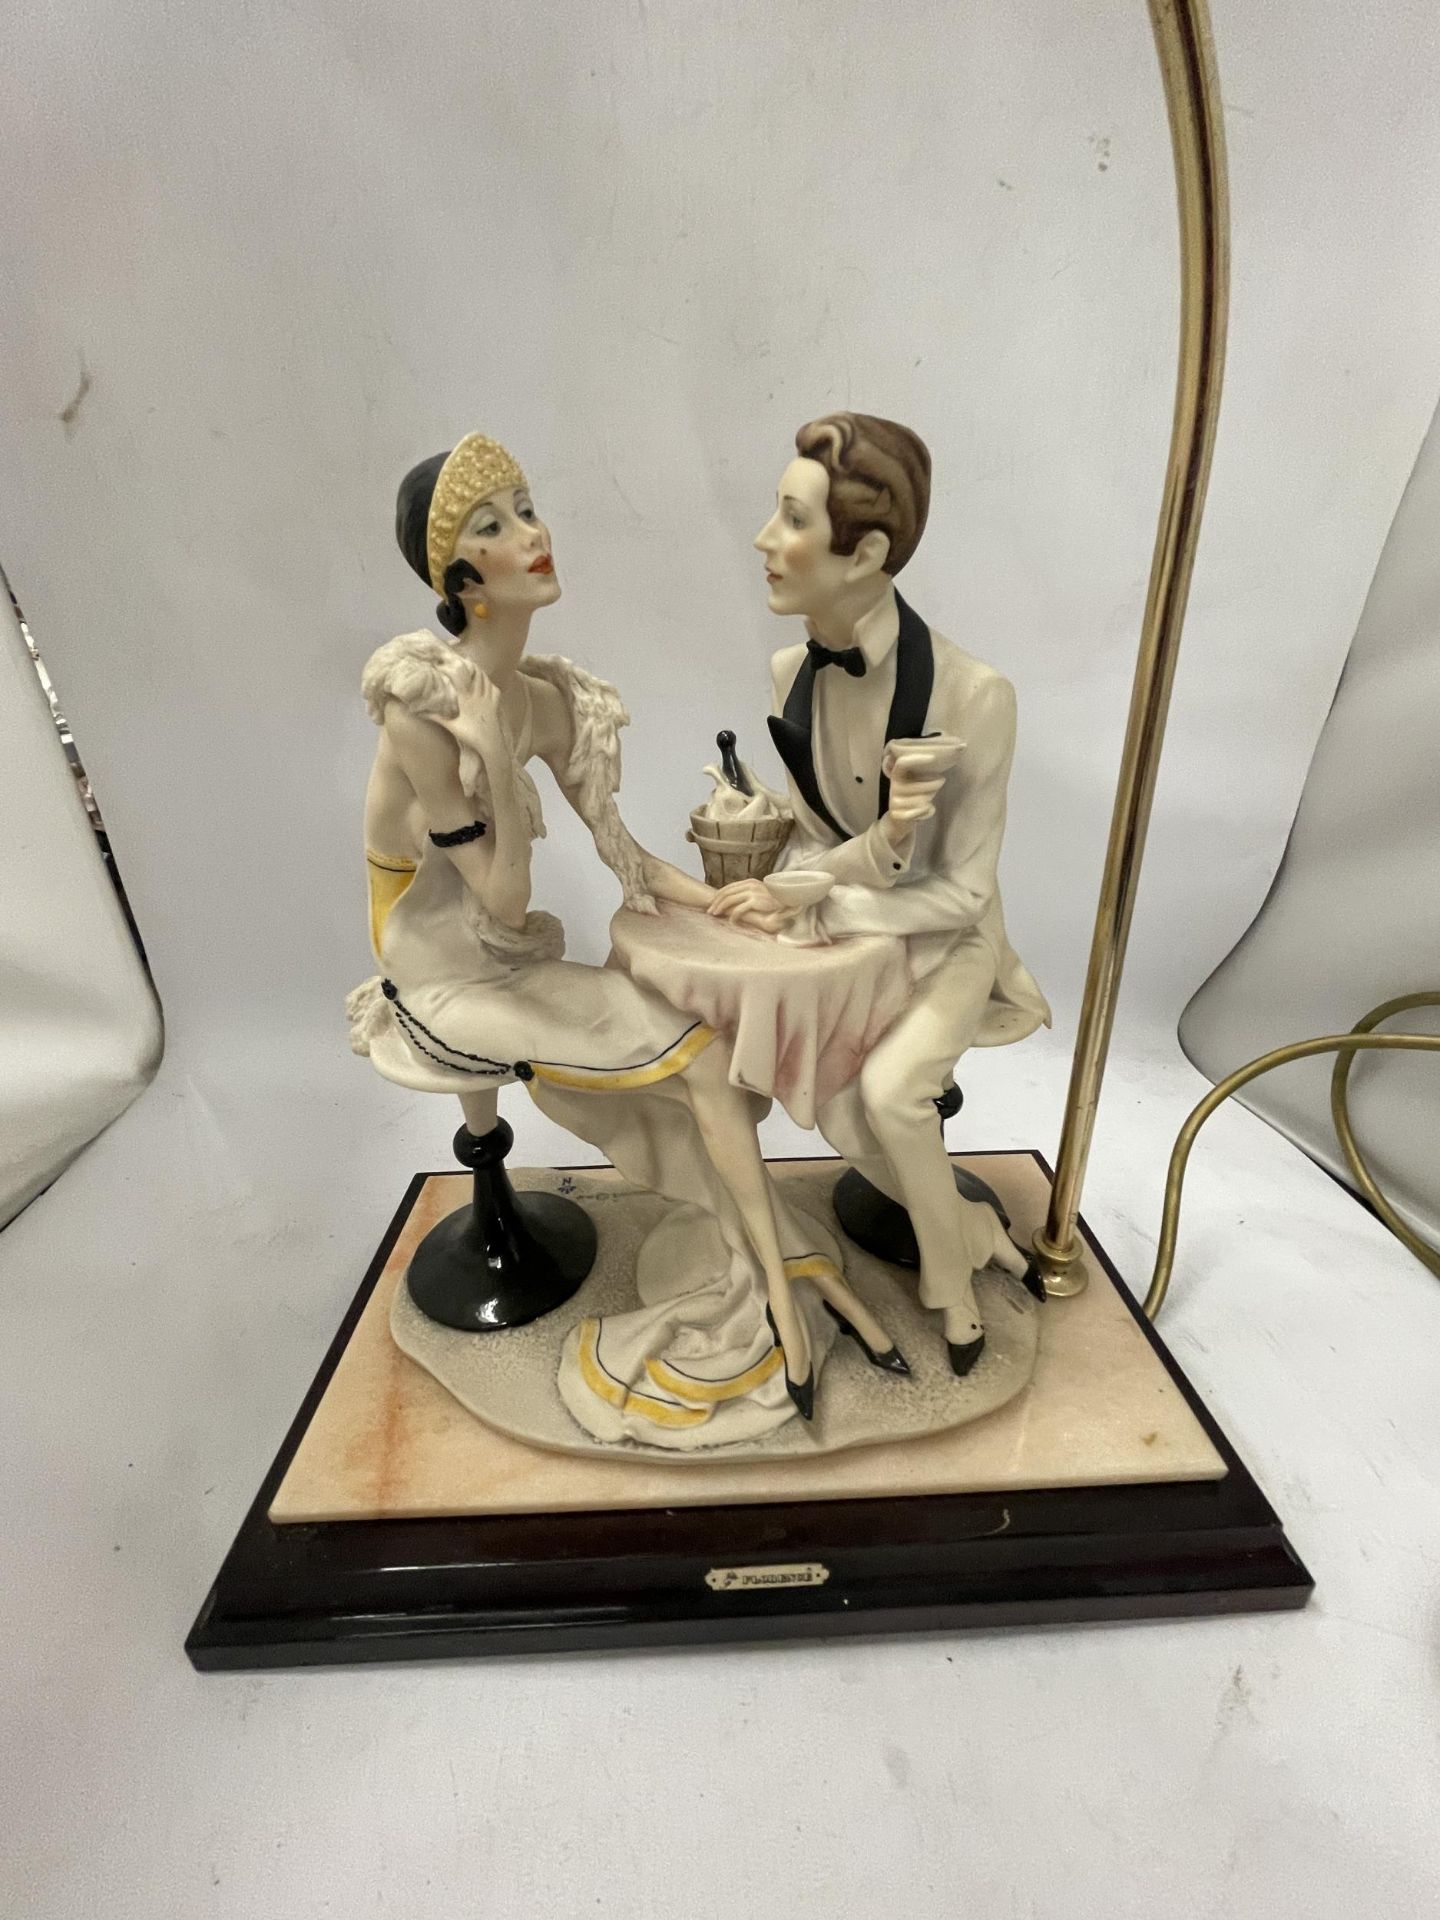 A 1987 FLORENCE CAPODIMONTE FIGURAL TABLE LAMP ON WOODEN BASE - Image 2 of 6